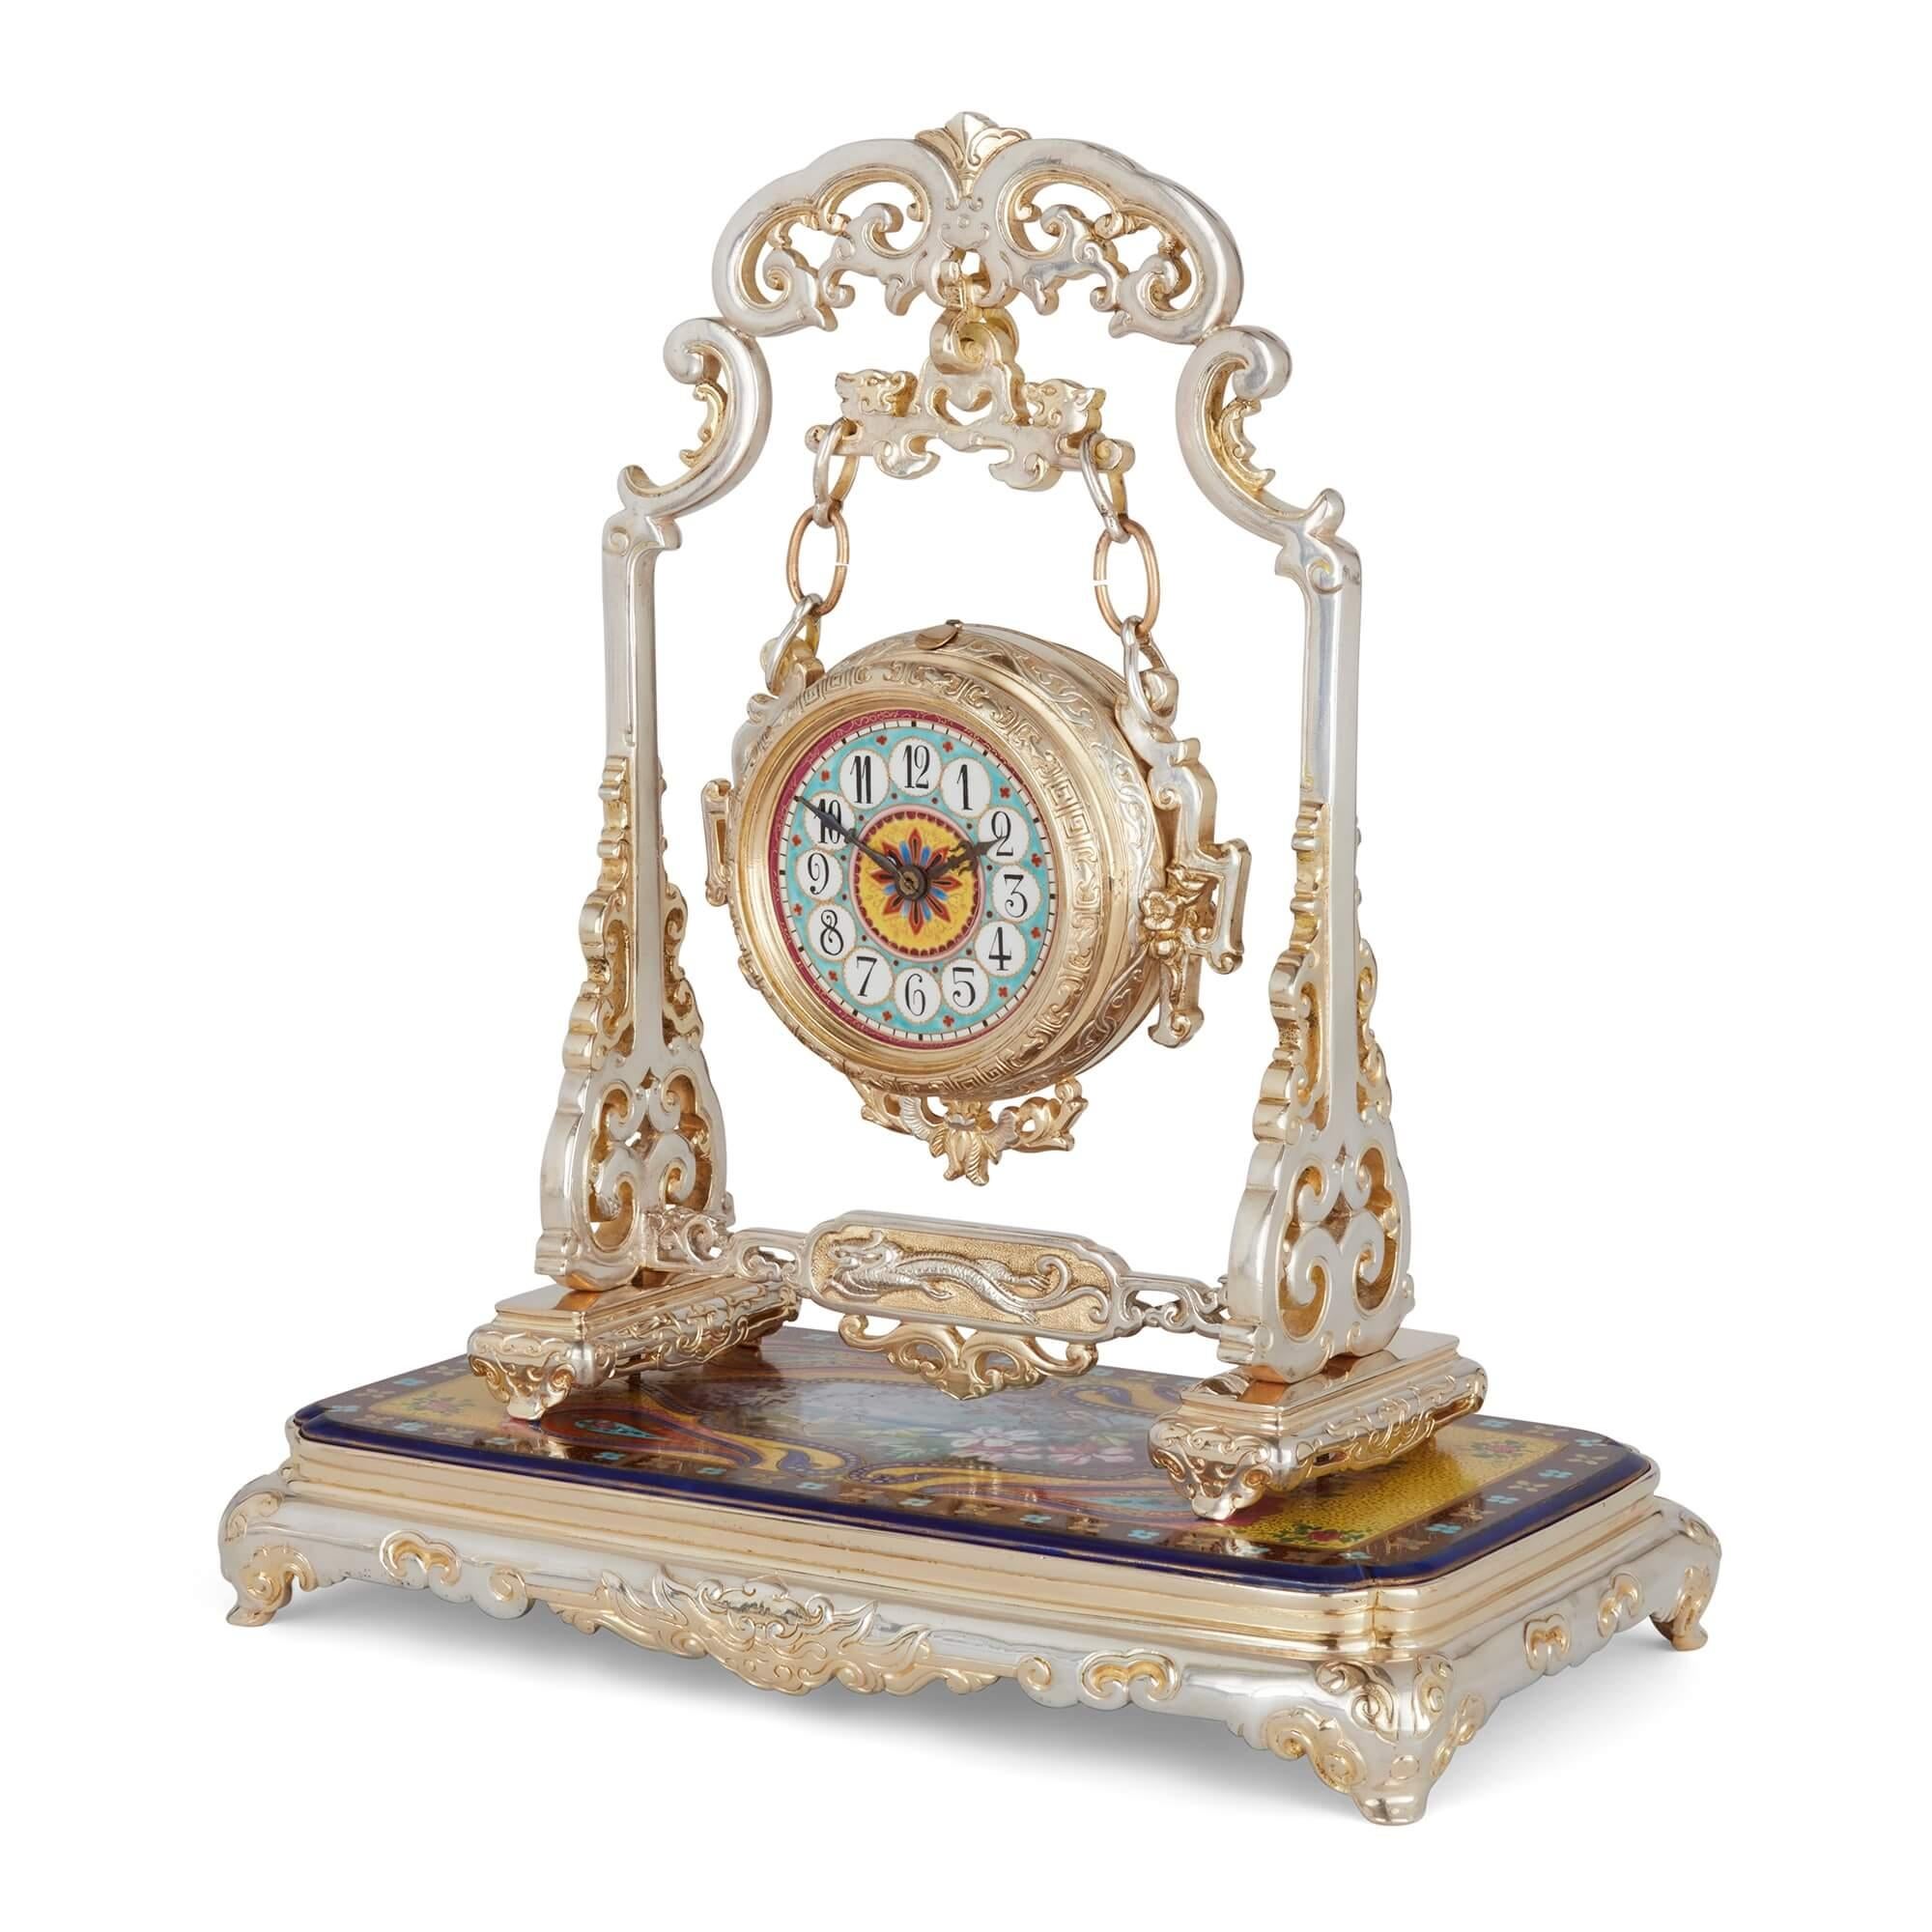 Antique French Japonisme silvered bronze and porcelain three-piece clock set 
French, Late 19th Century 
Clock: Height 36cm, width 32cm, depth 17cm 
Candelabra: Height 28cm, width 26cm, depth 10cm

This Japonisme three-piece clock garniture